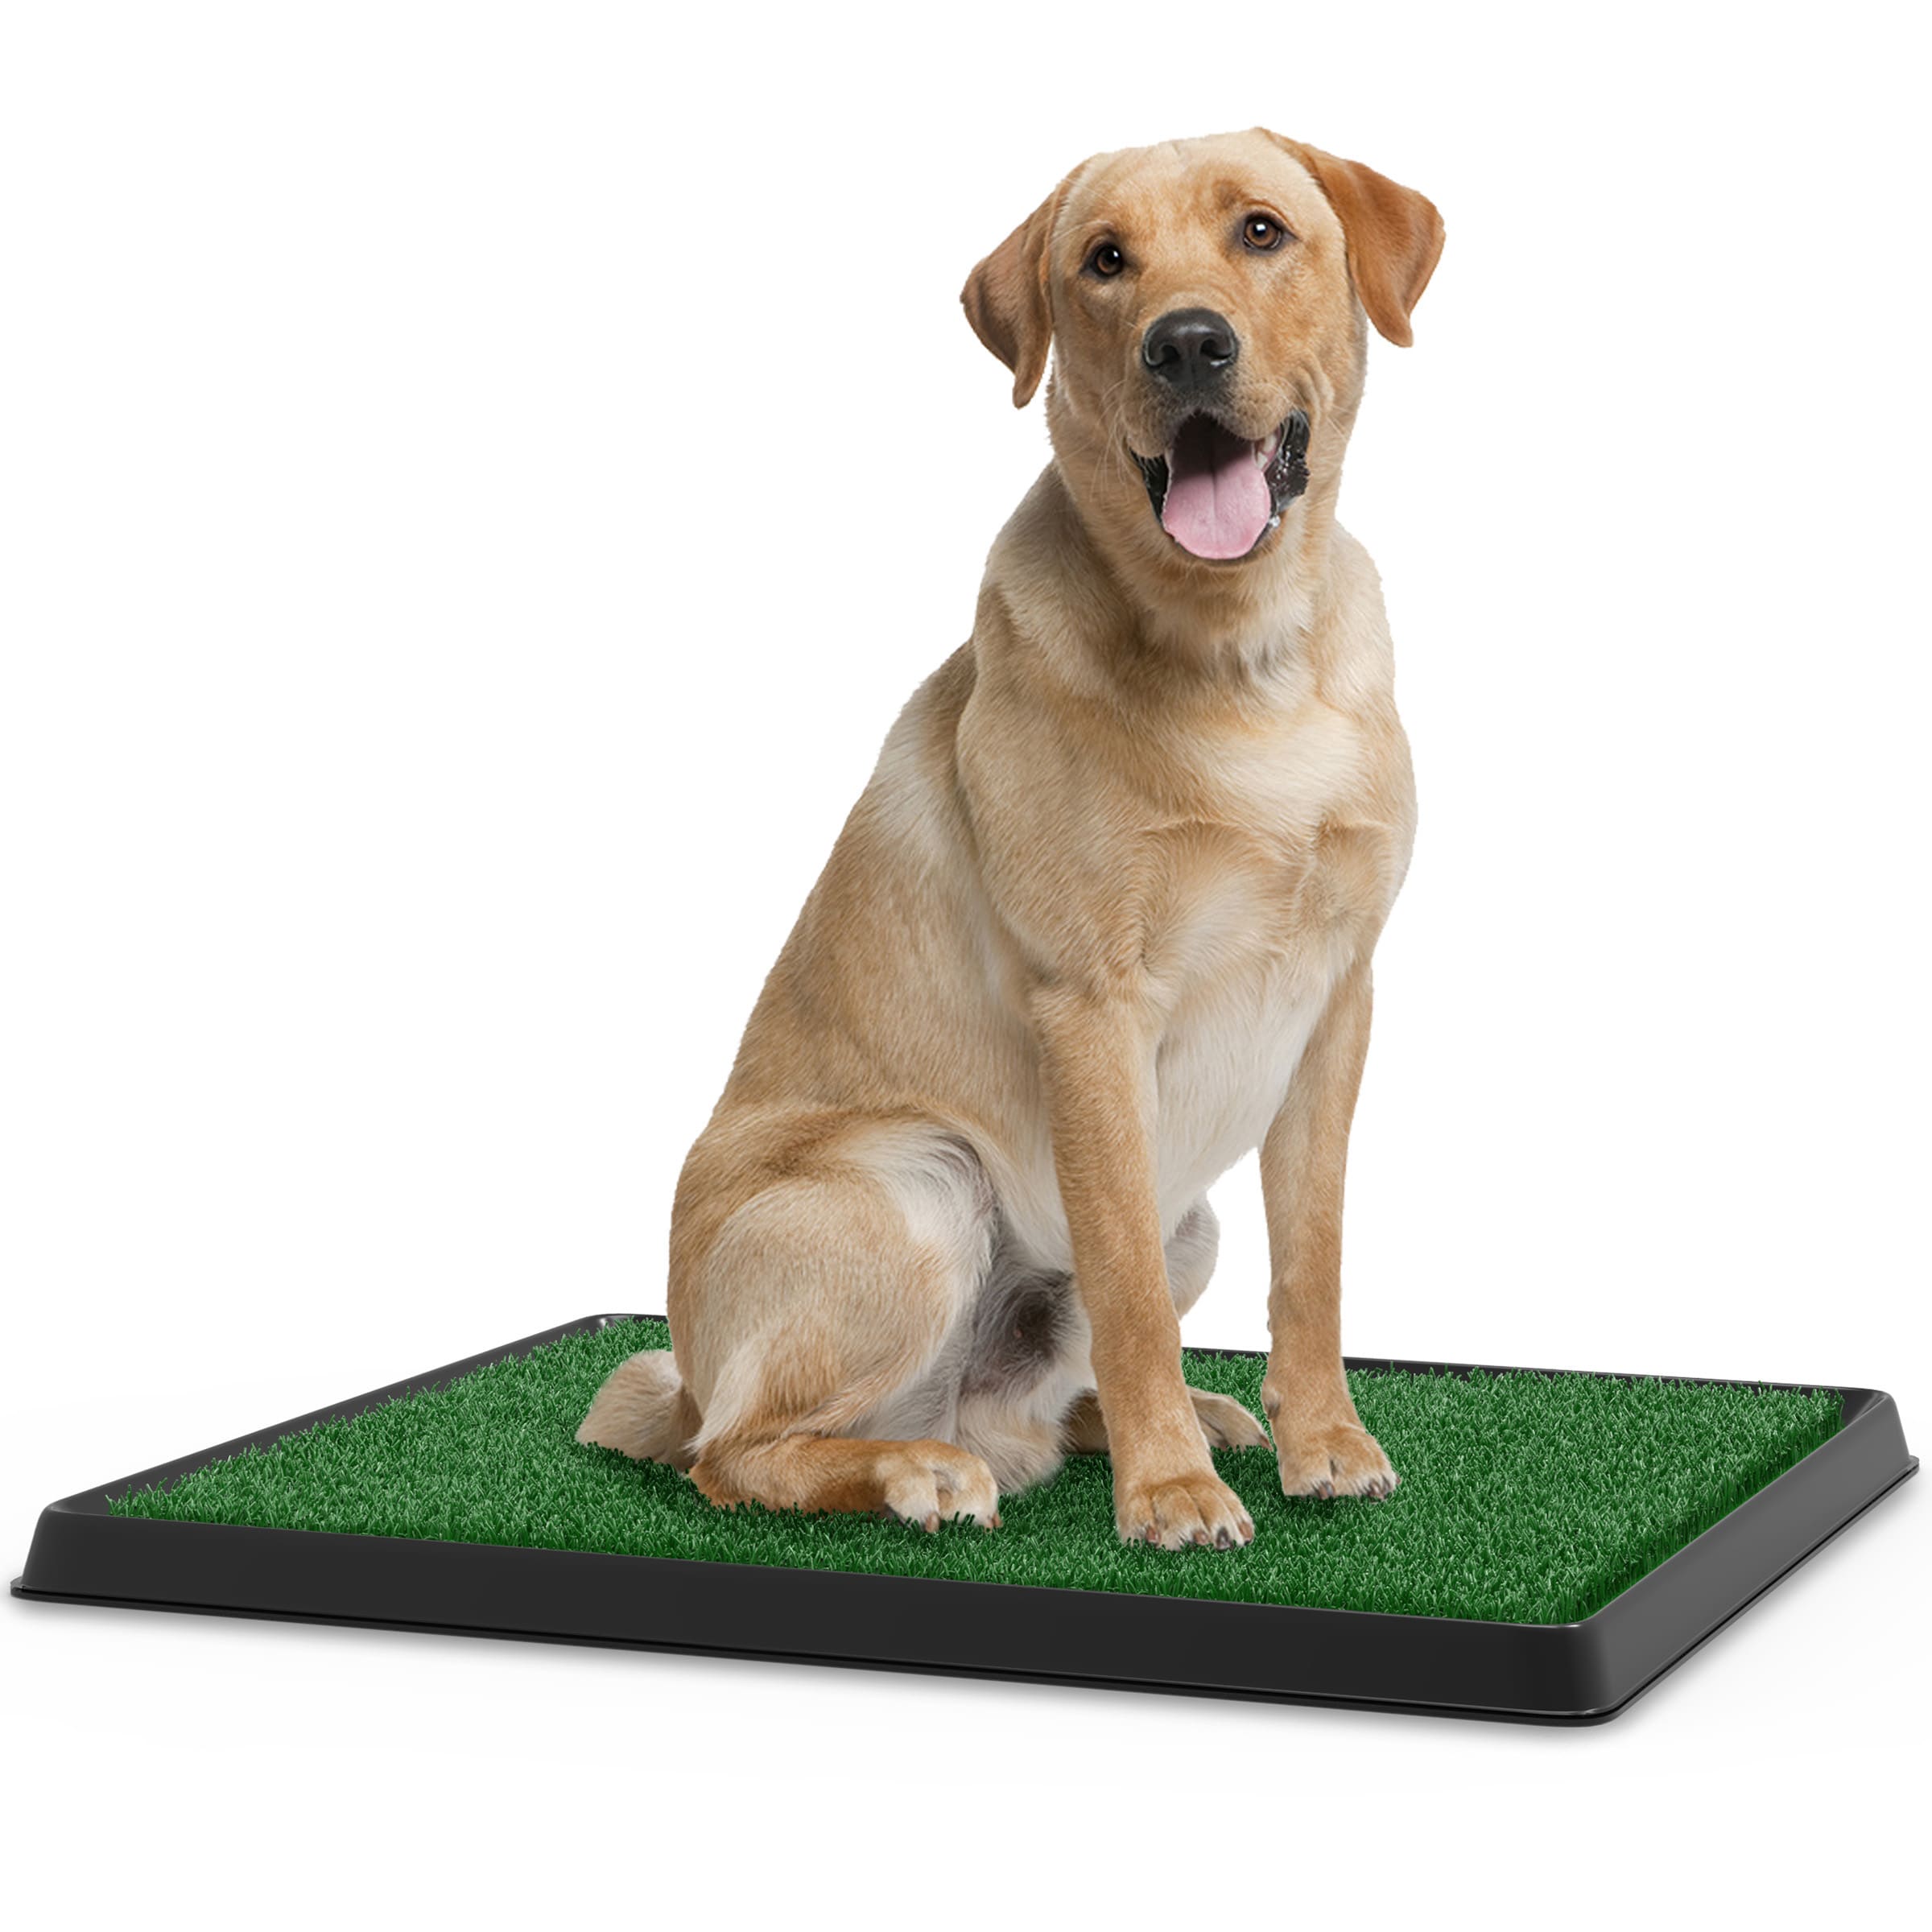 Pet Adobe Artificial Grass Potty Trainer Mat for Dogs